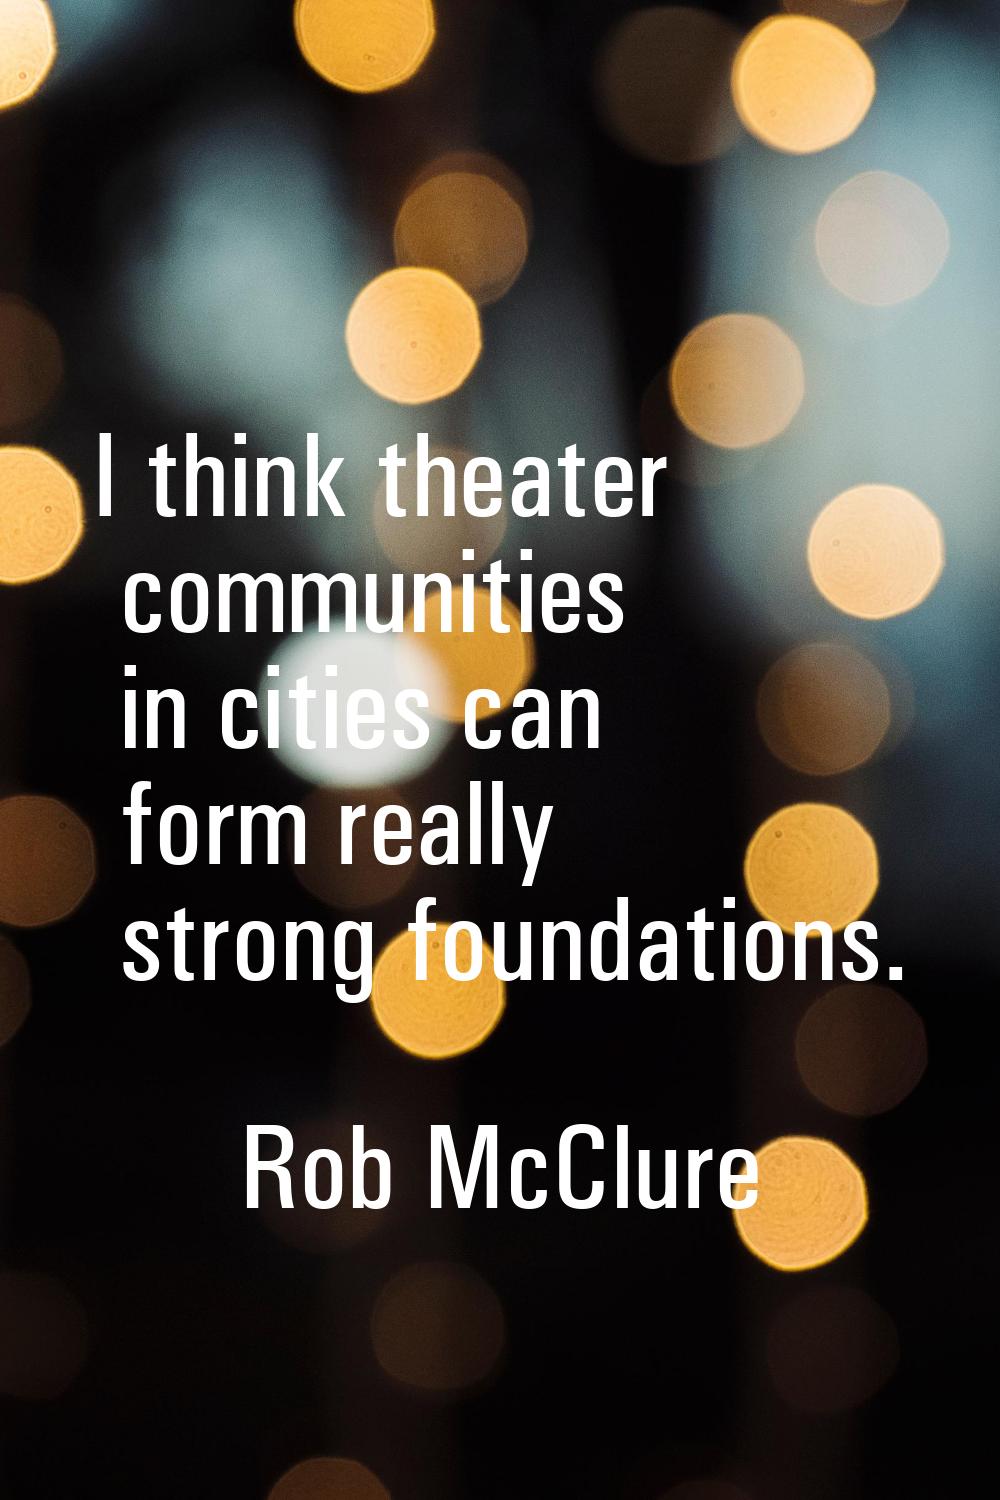 I think theater communities in cities can form really strong foundations.